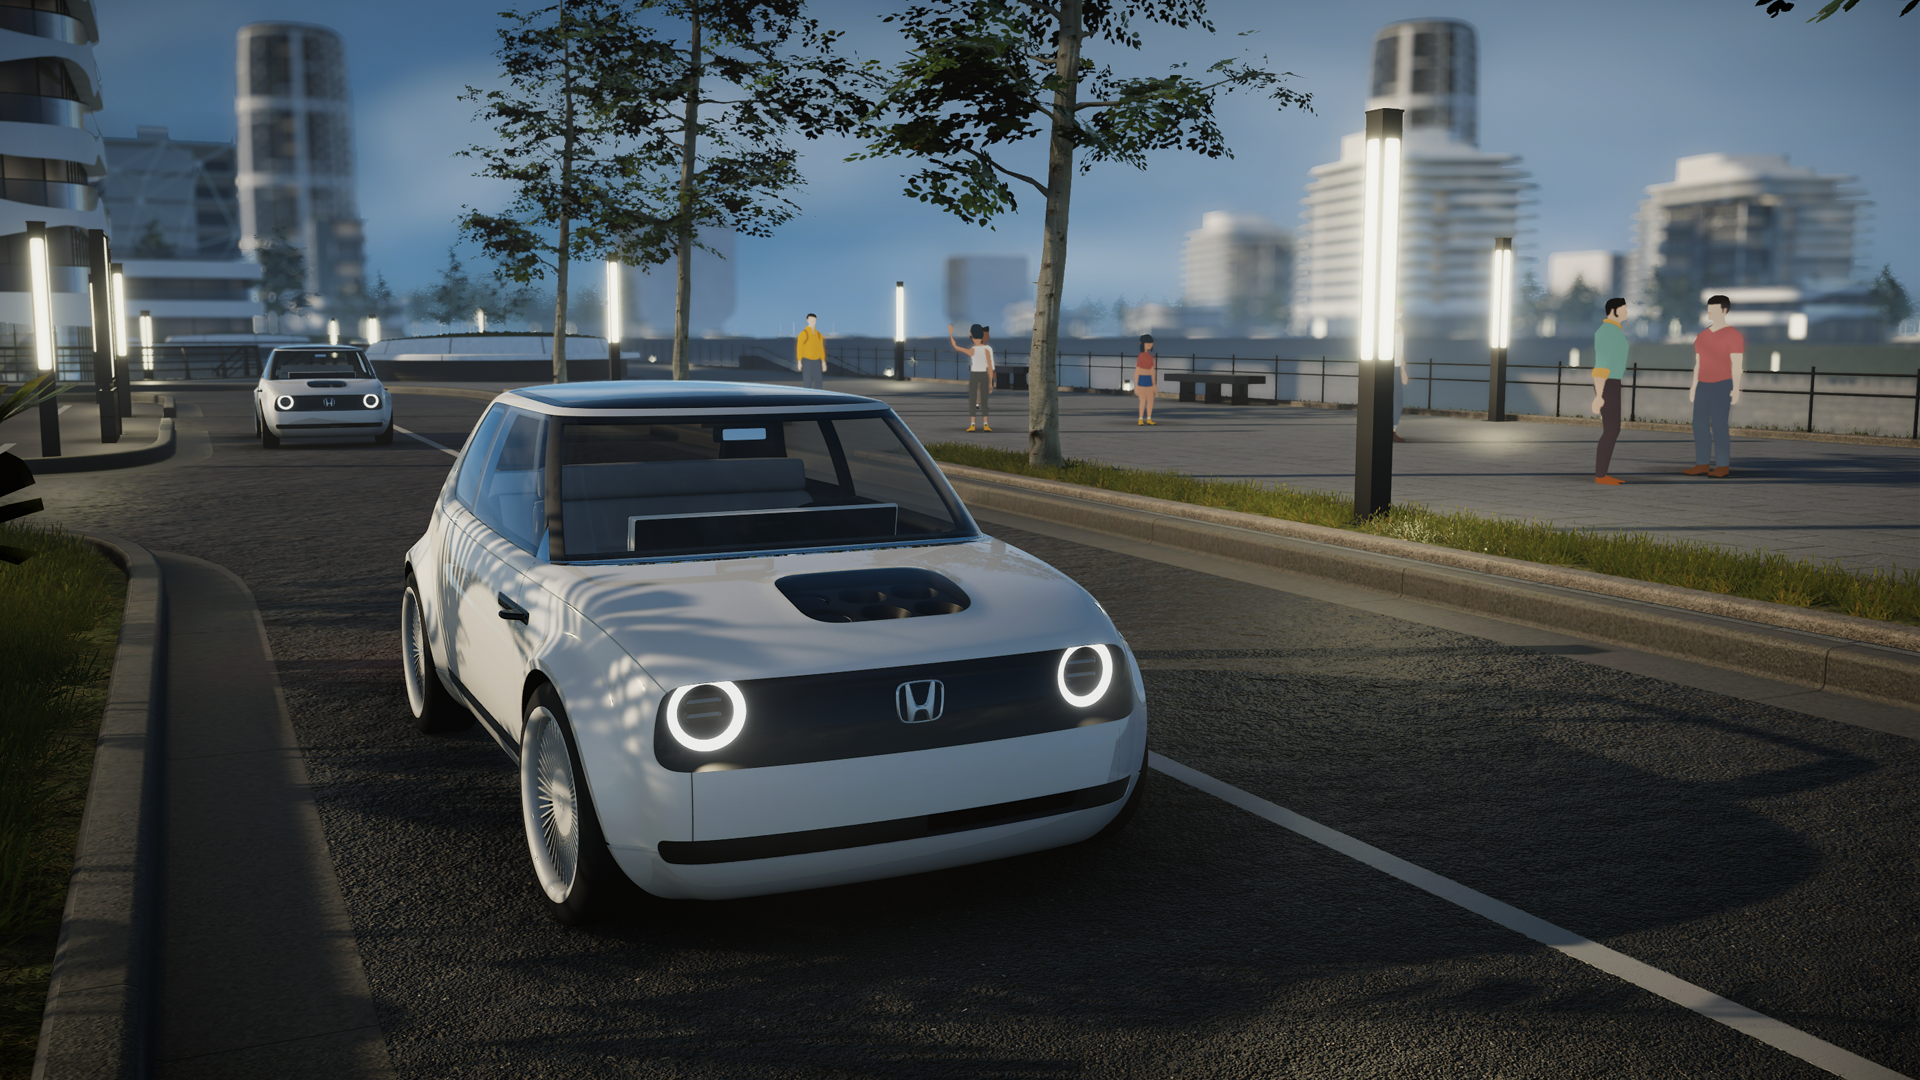 Honda extended the Unity Editor to meet the needs of its automotive designers with limited Unity expertise